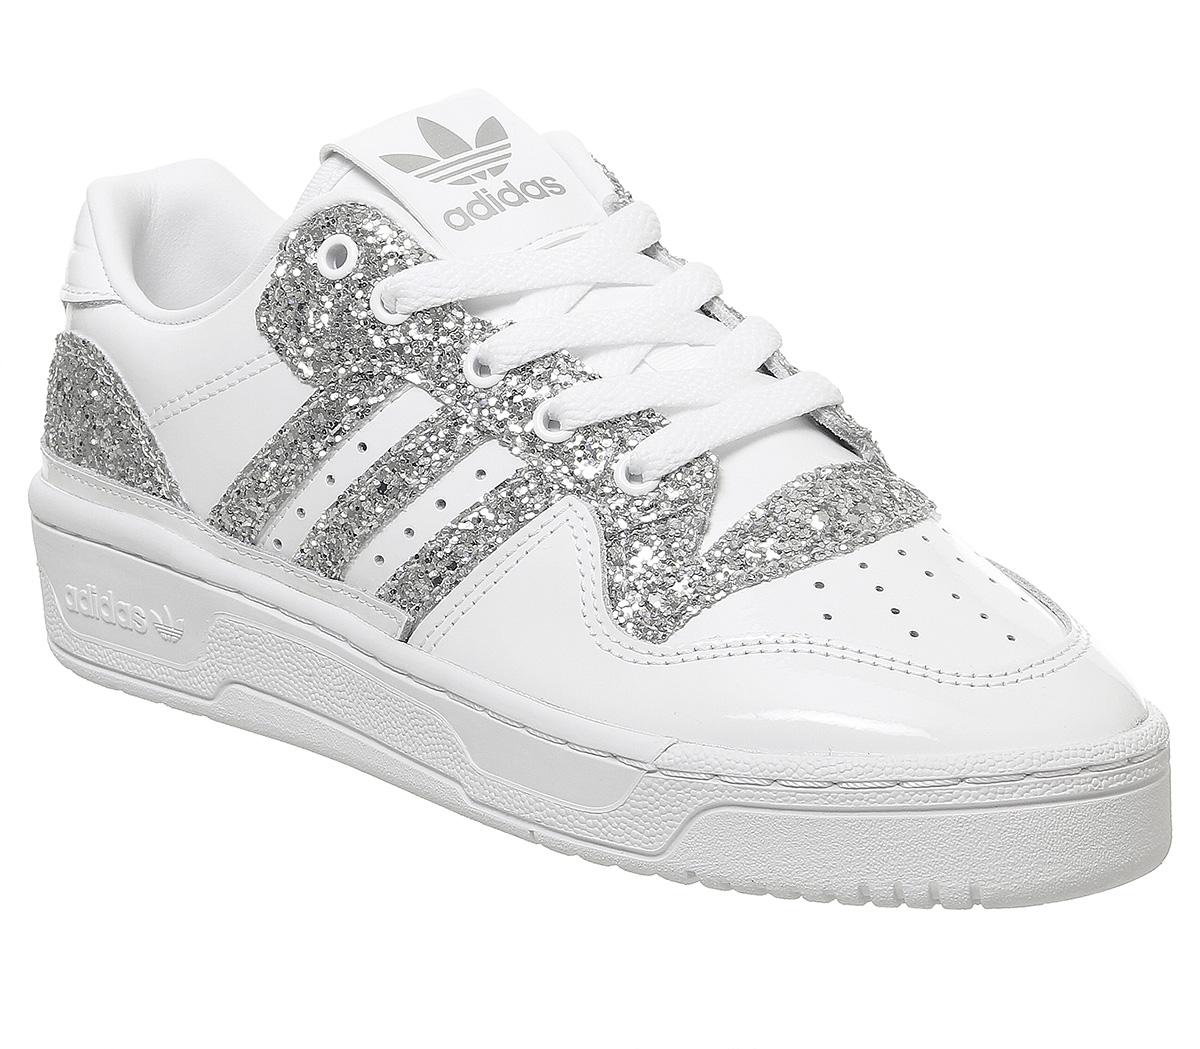 ladies white sparkly trainers